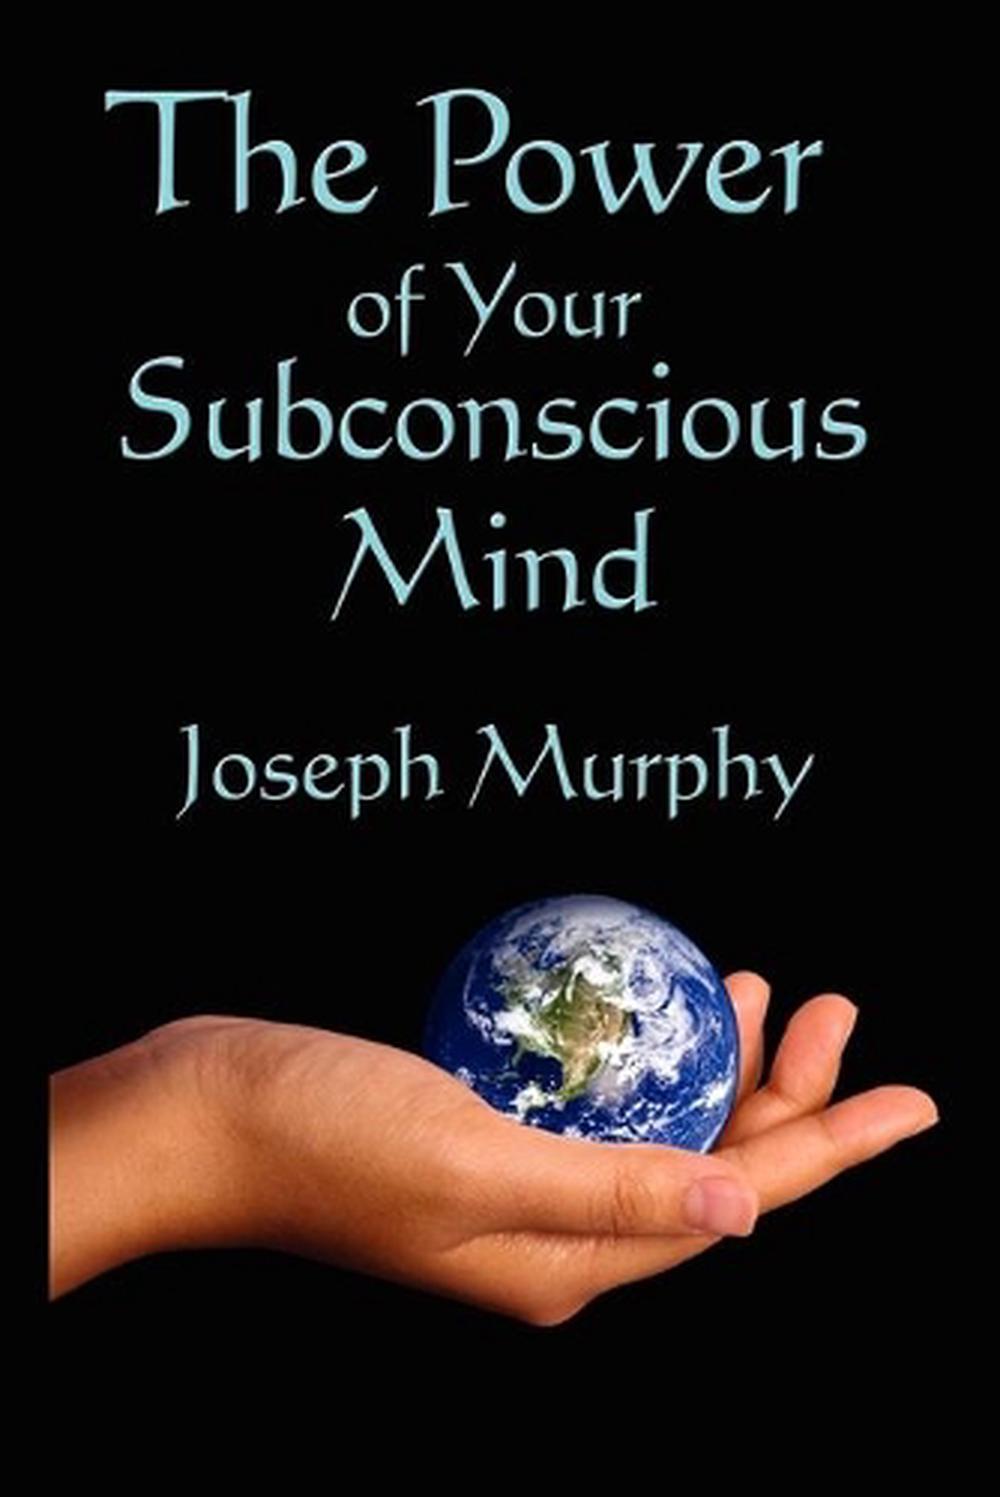 dr joseph murphy the power of the subconscious mind